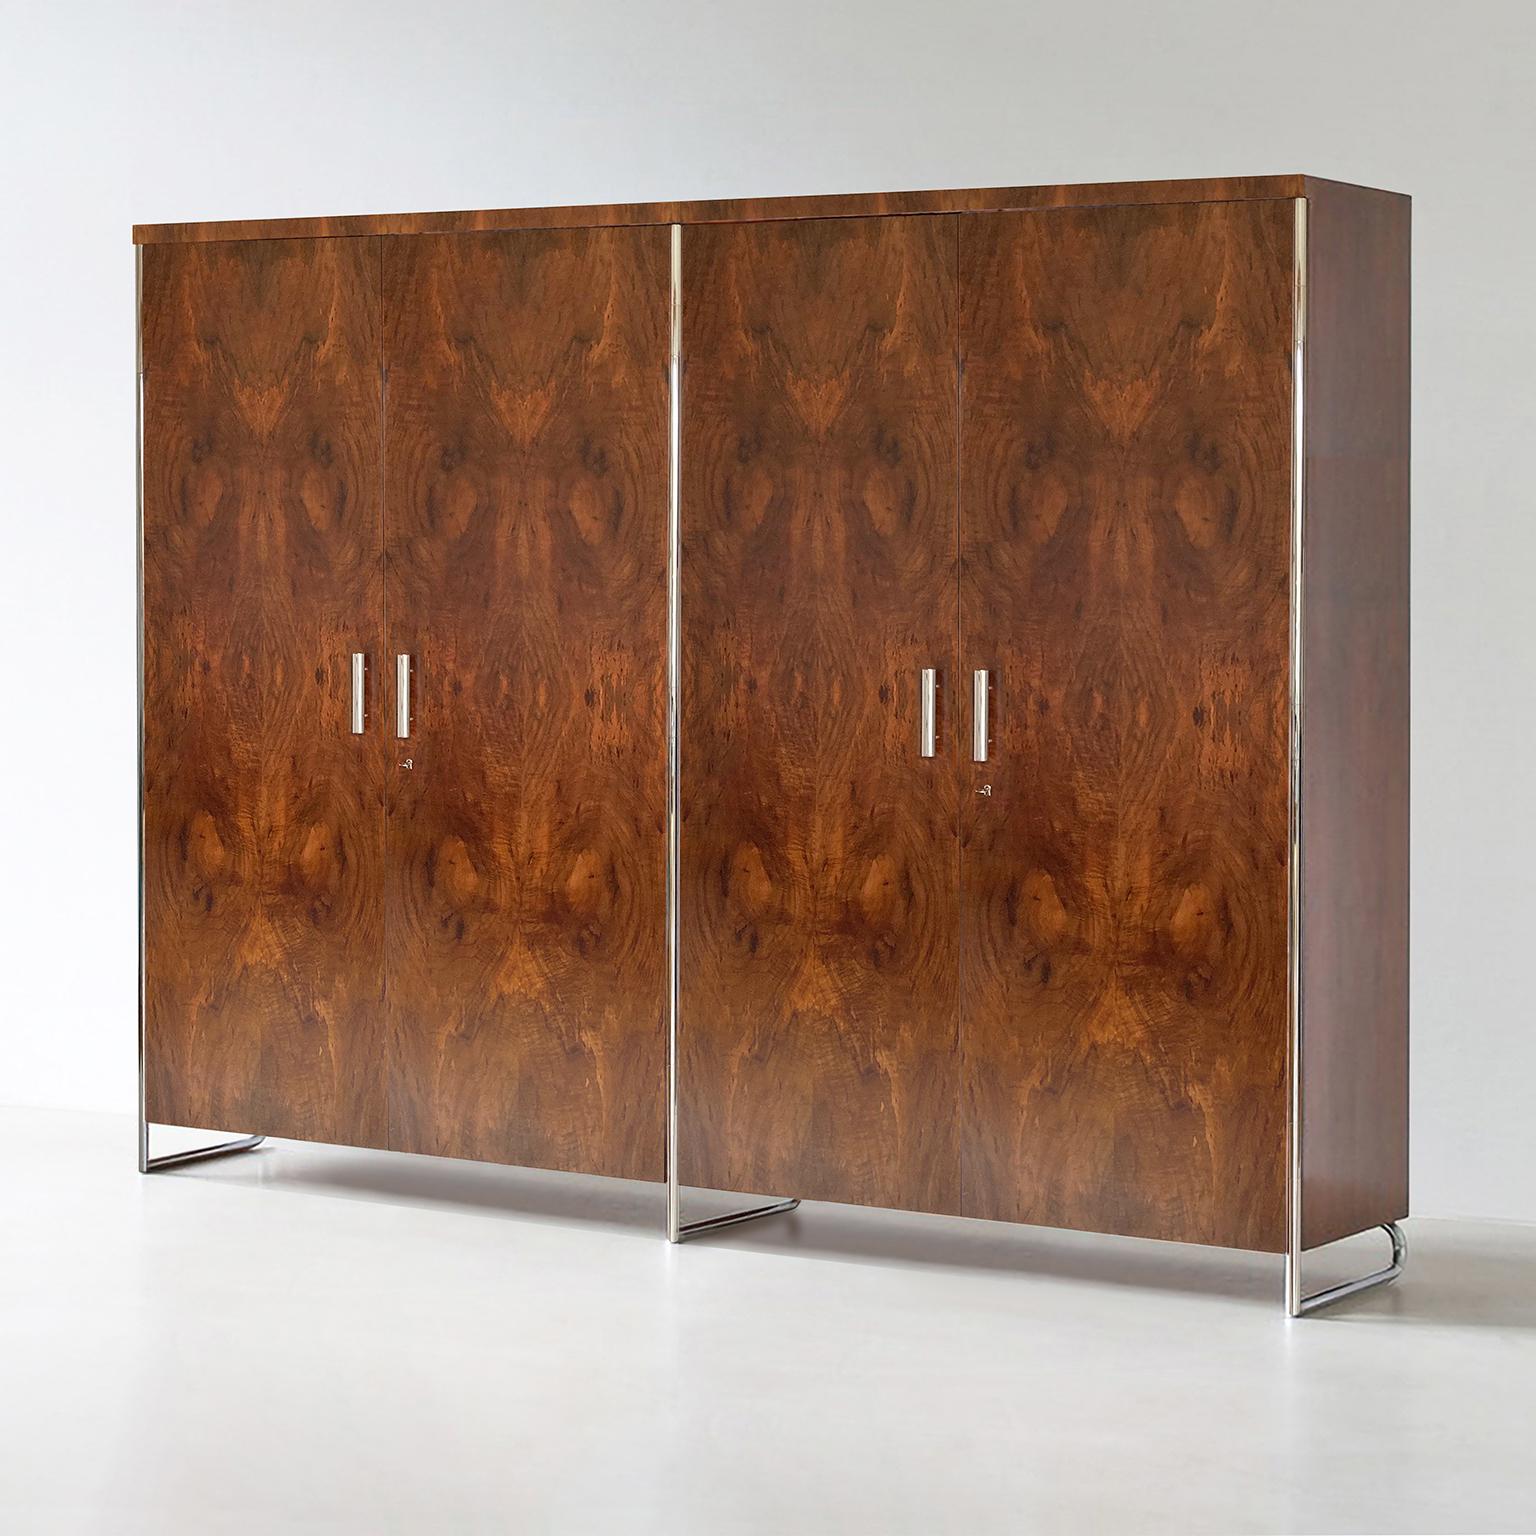 Made-to-measure Bauhaus wardrobe designed by Hermann John Hagemann and Manufactured by GMD Berlin. The four door wardrobe is made of chrome plated metal and walnut veneer.